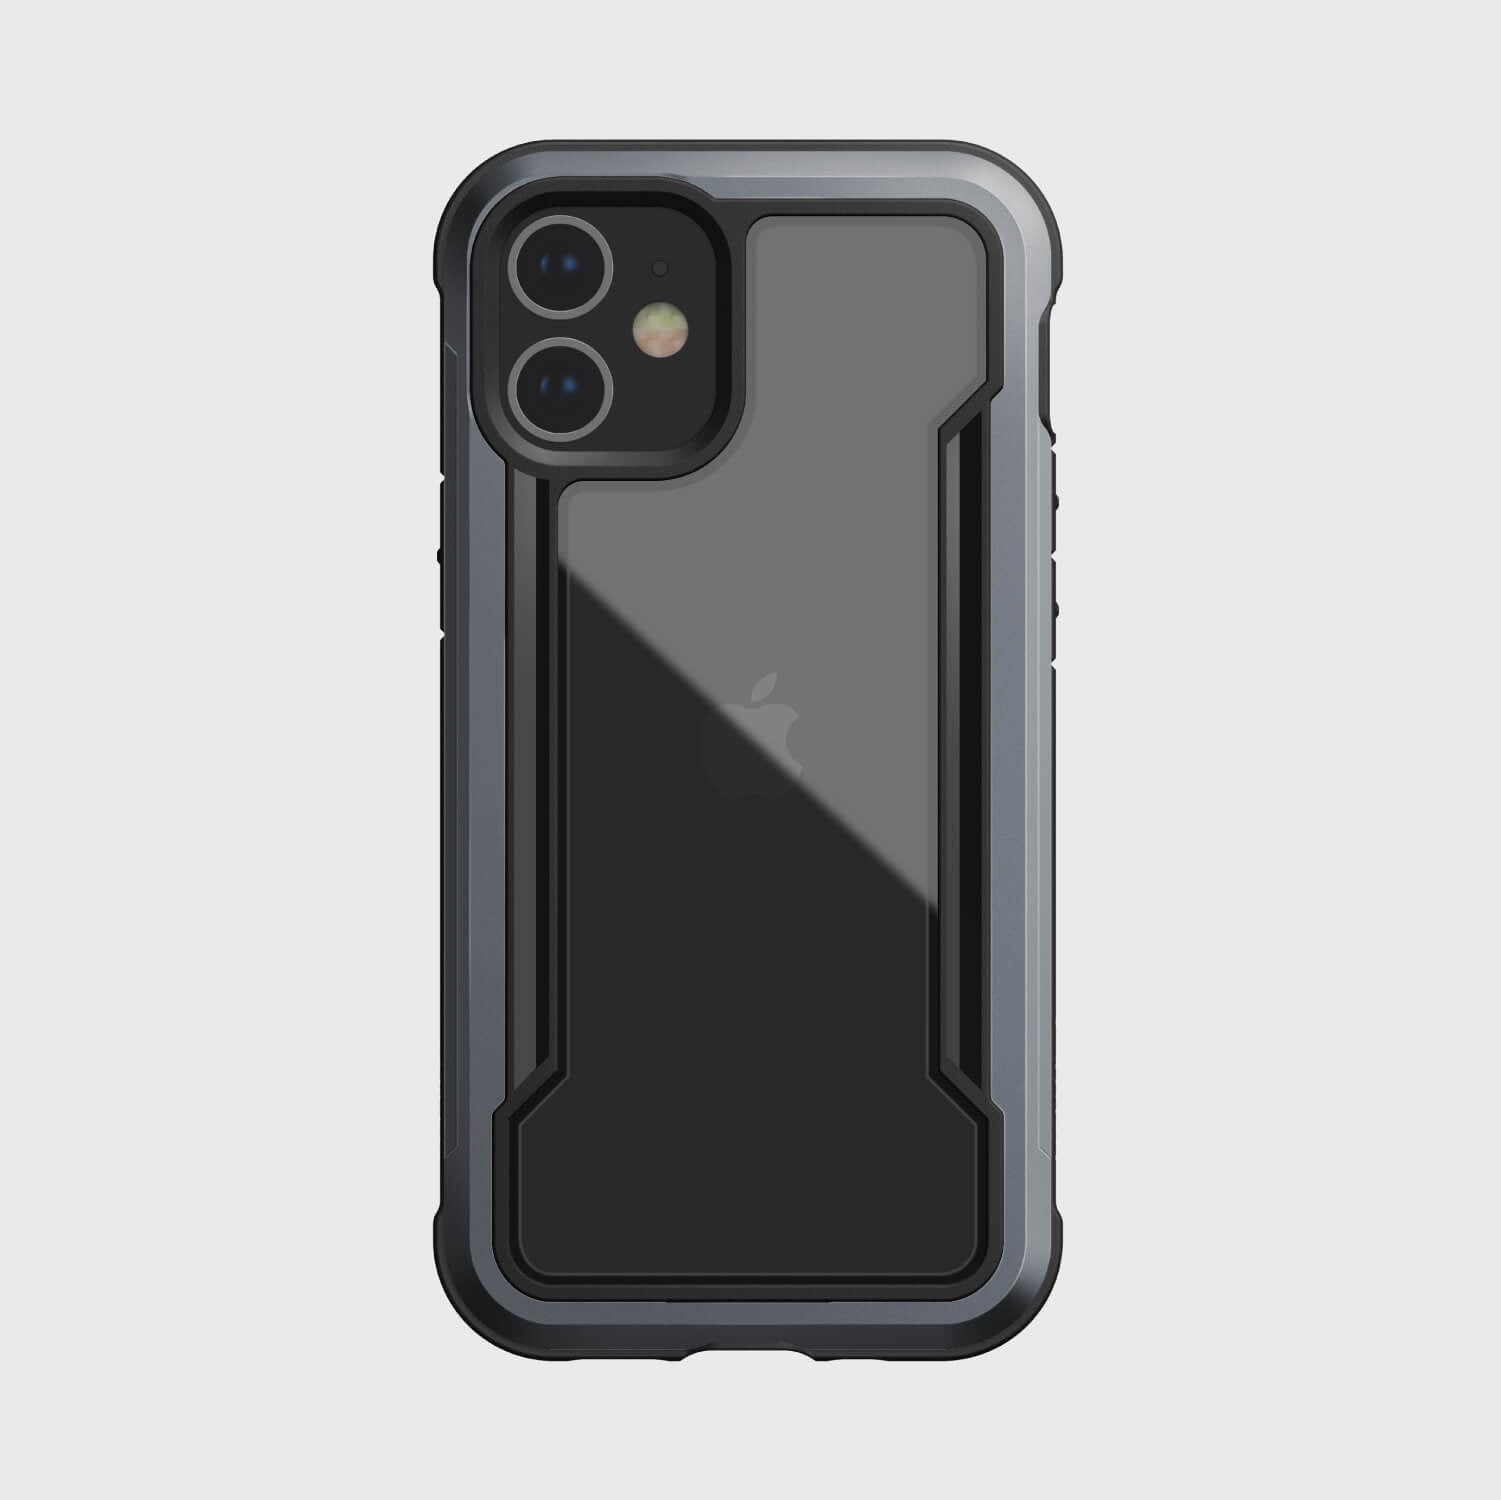 The back view of an iPhone 12 Mini Case - SHIELD by Raptic.